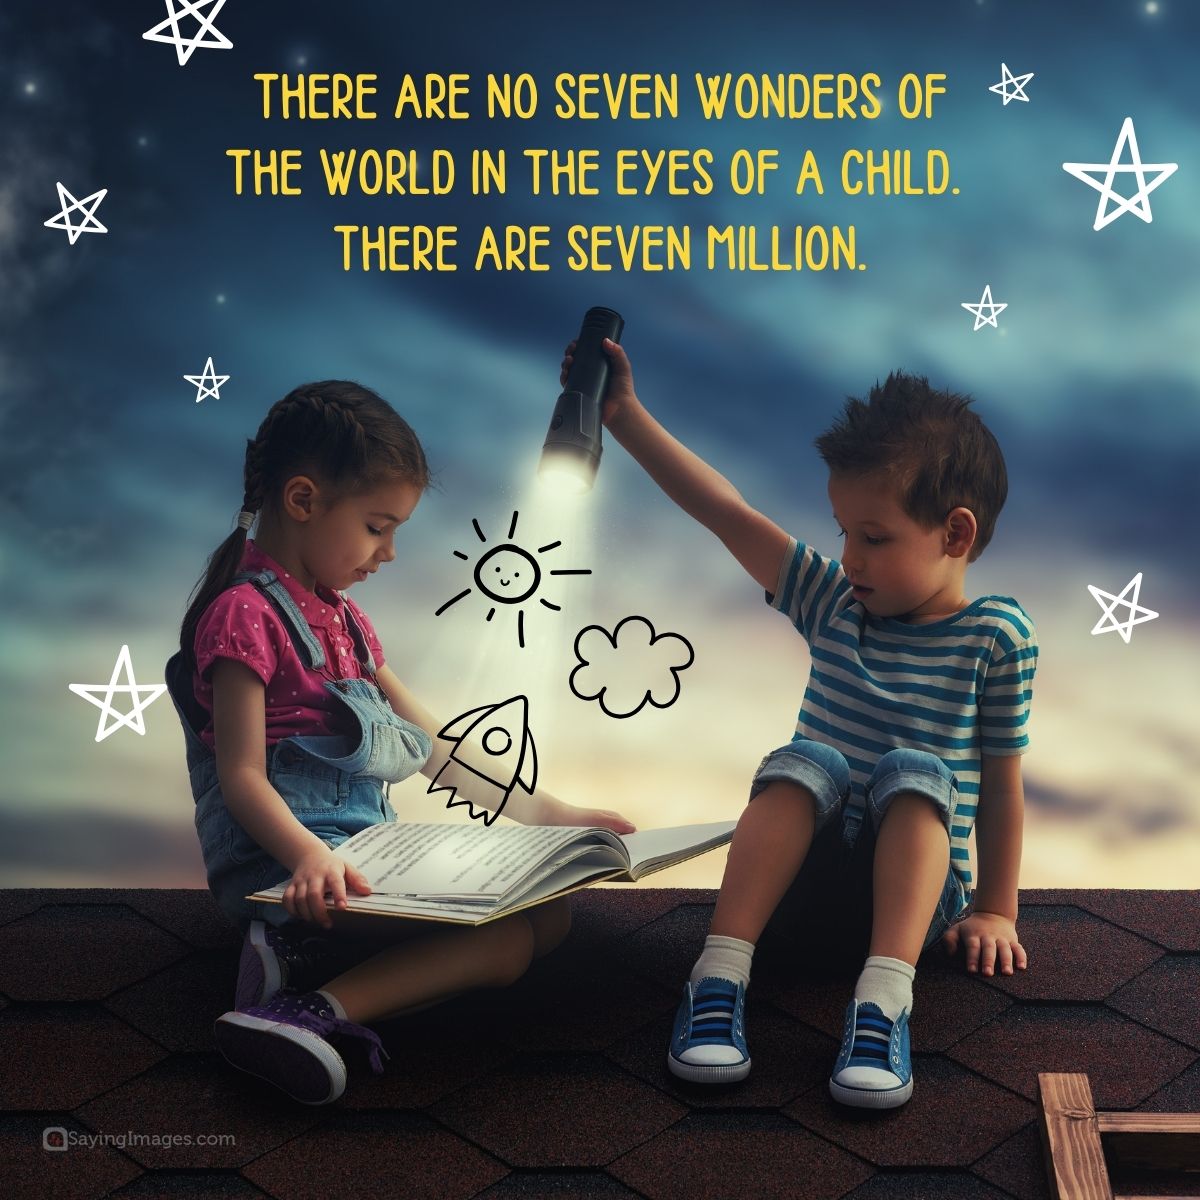 There are no seven wonders of the world in the eyes of a child